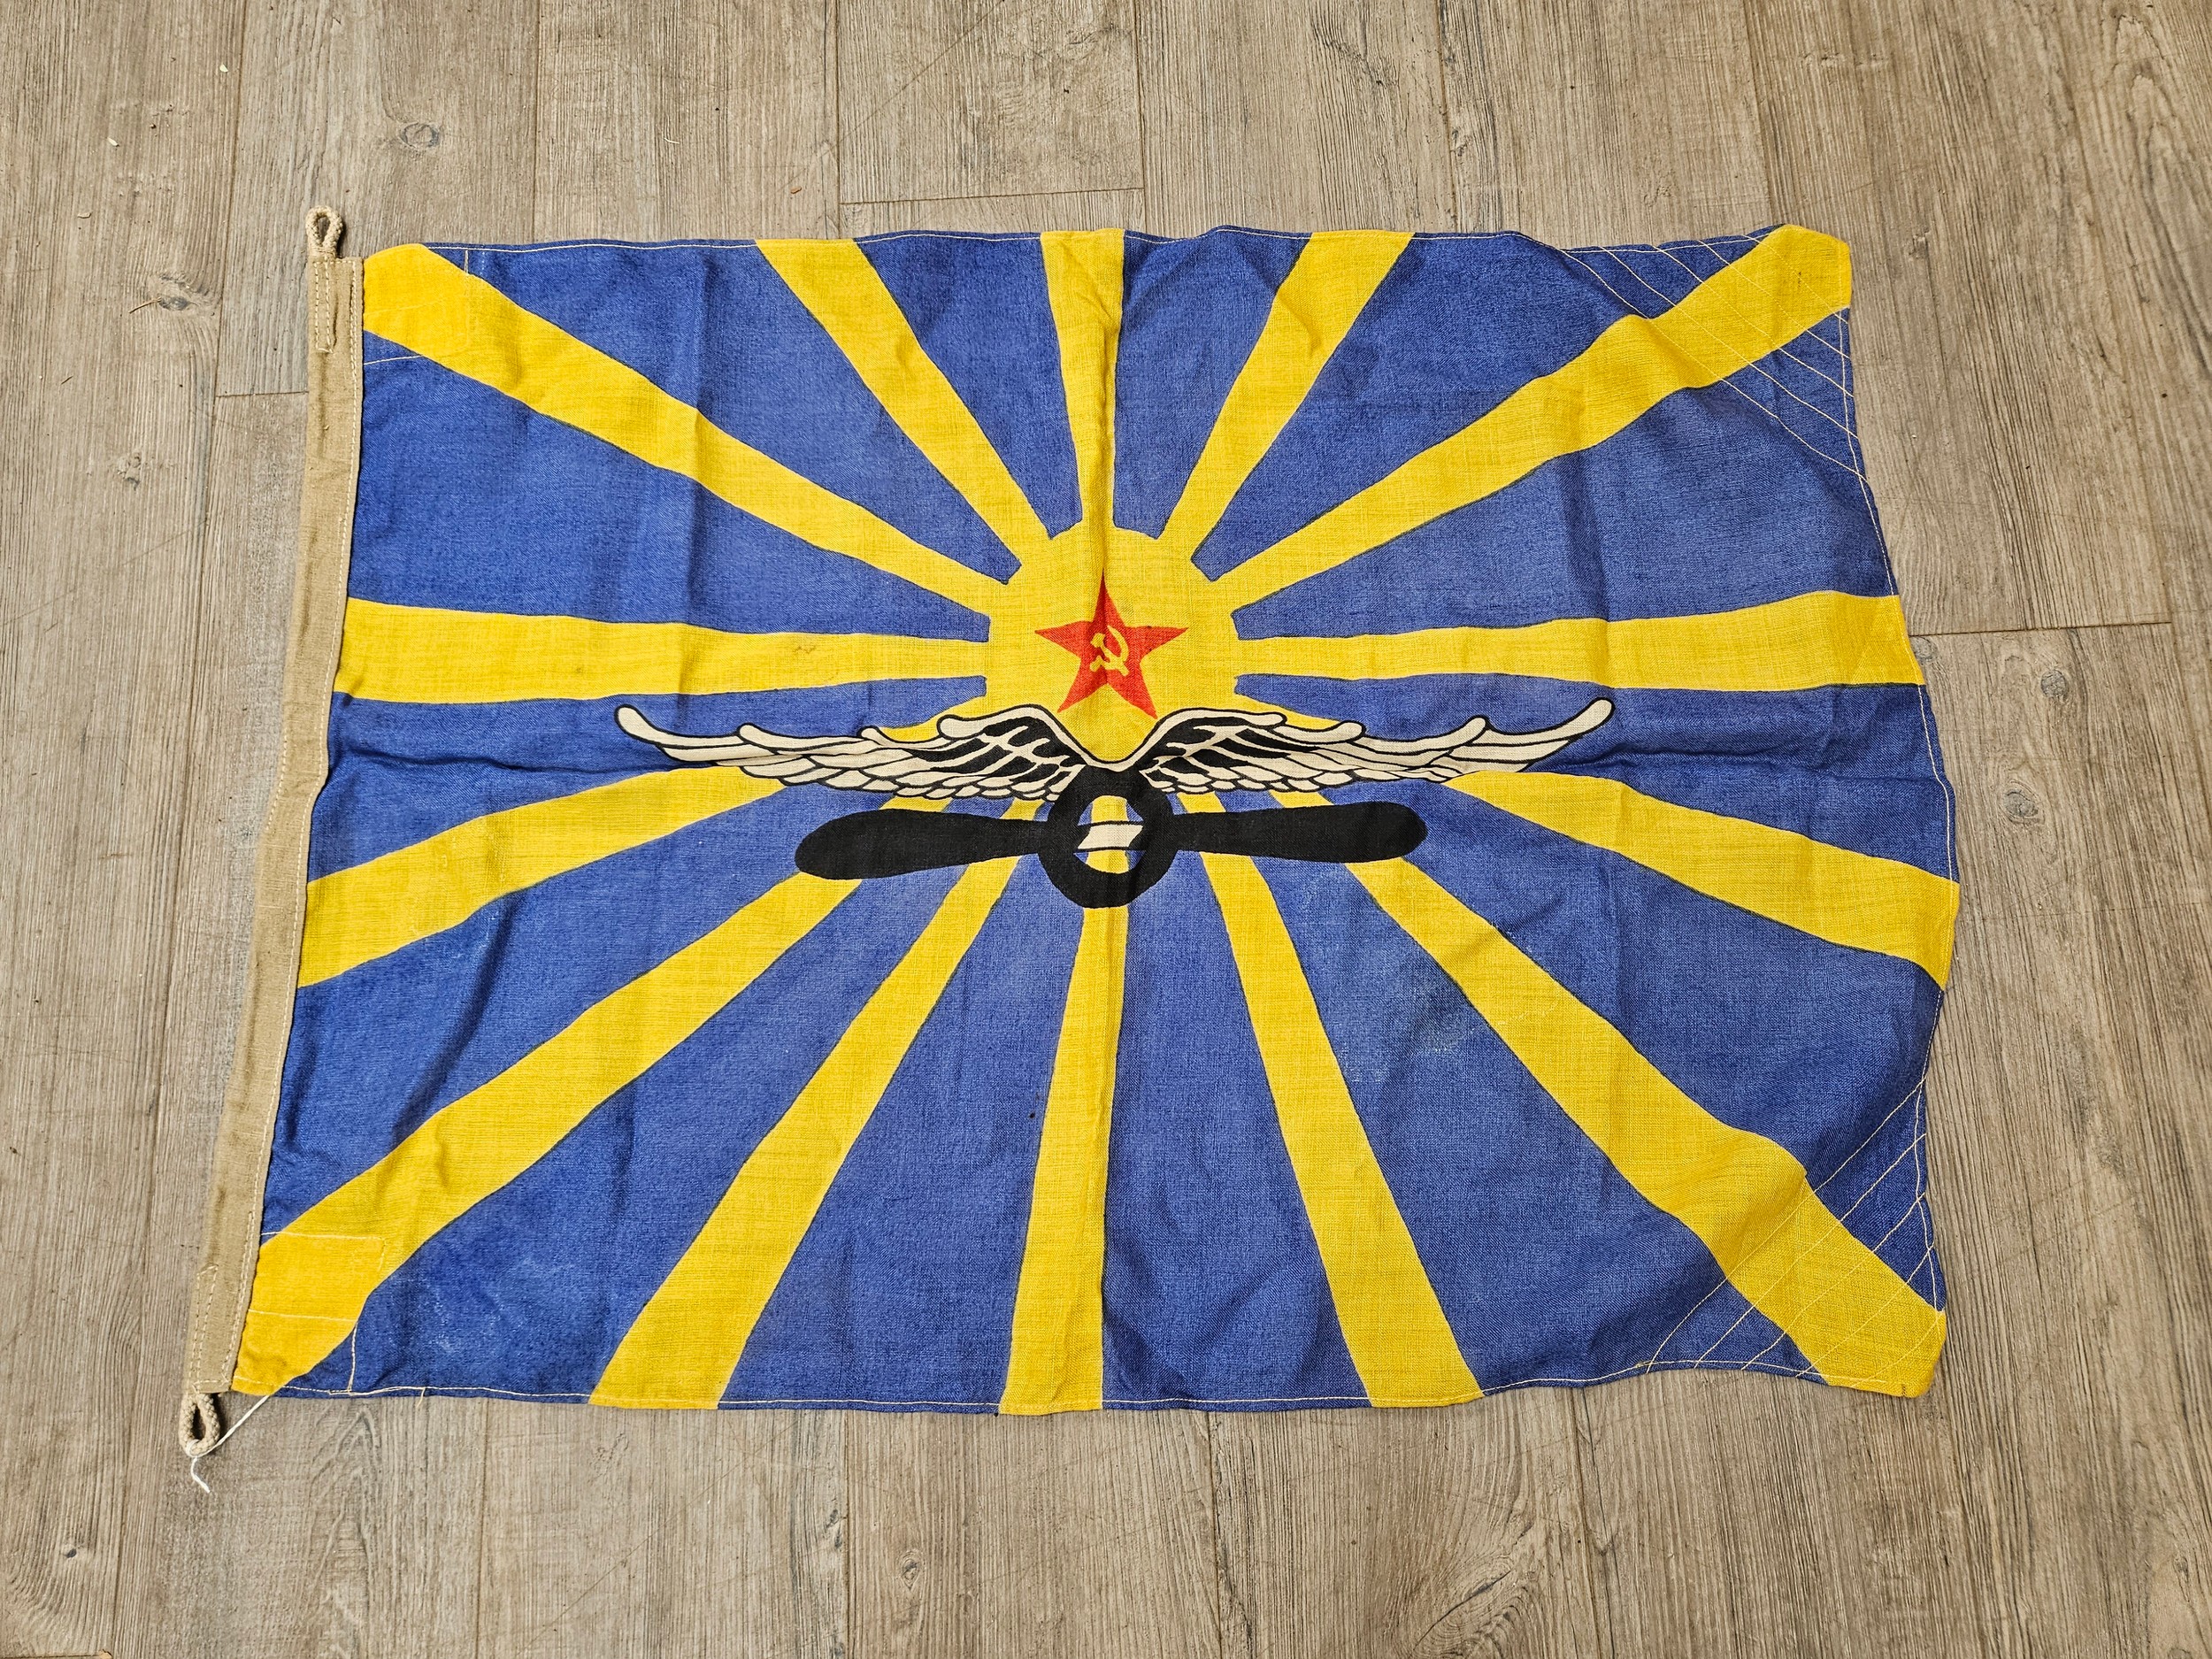 A Russian USSR Soviet Air Force flag, yellow sun rays on a blue ground with wings and propeller